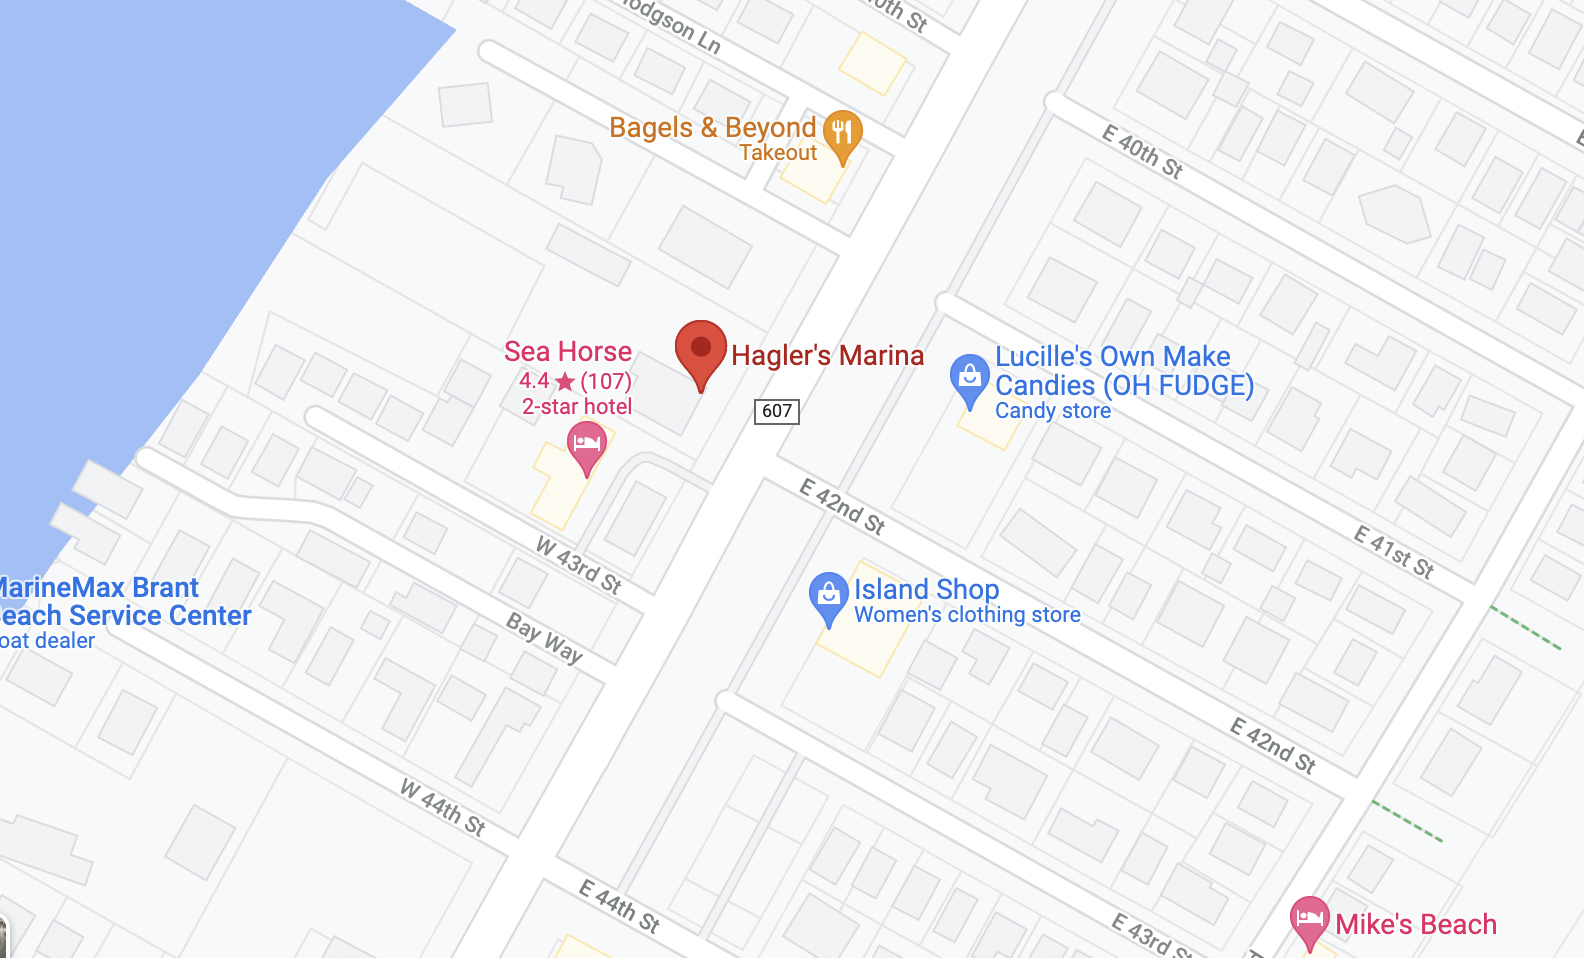 Map Location of Hagler's Marina - it's right across from Lucille's Fudge on route 72